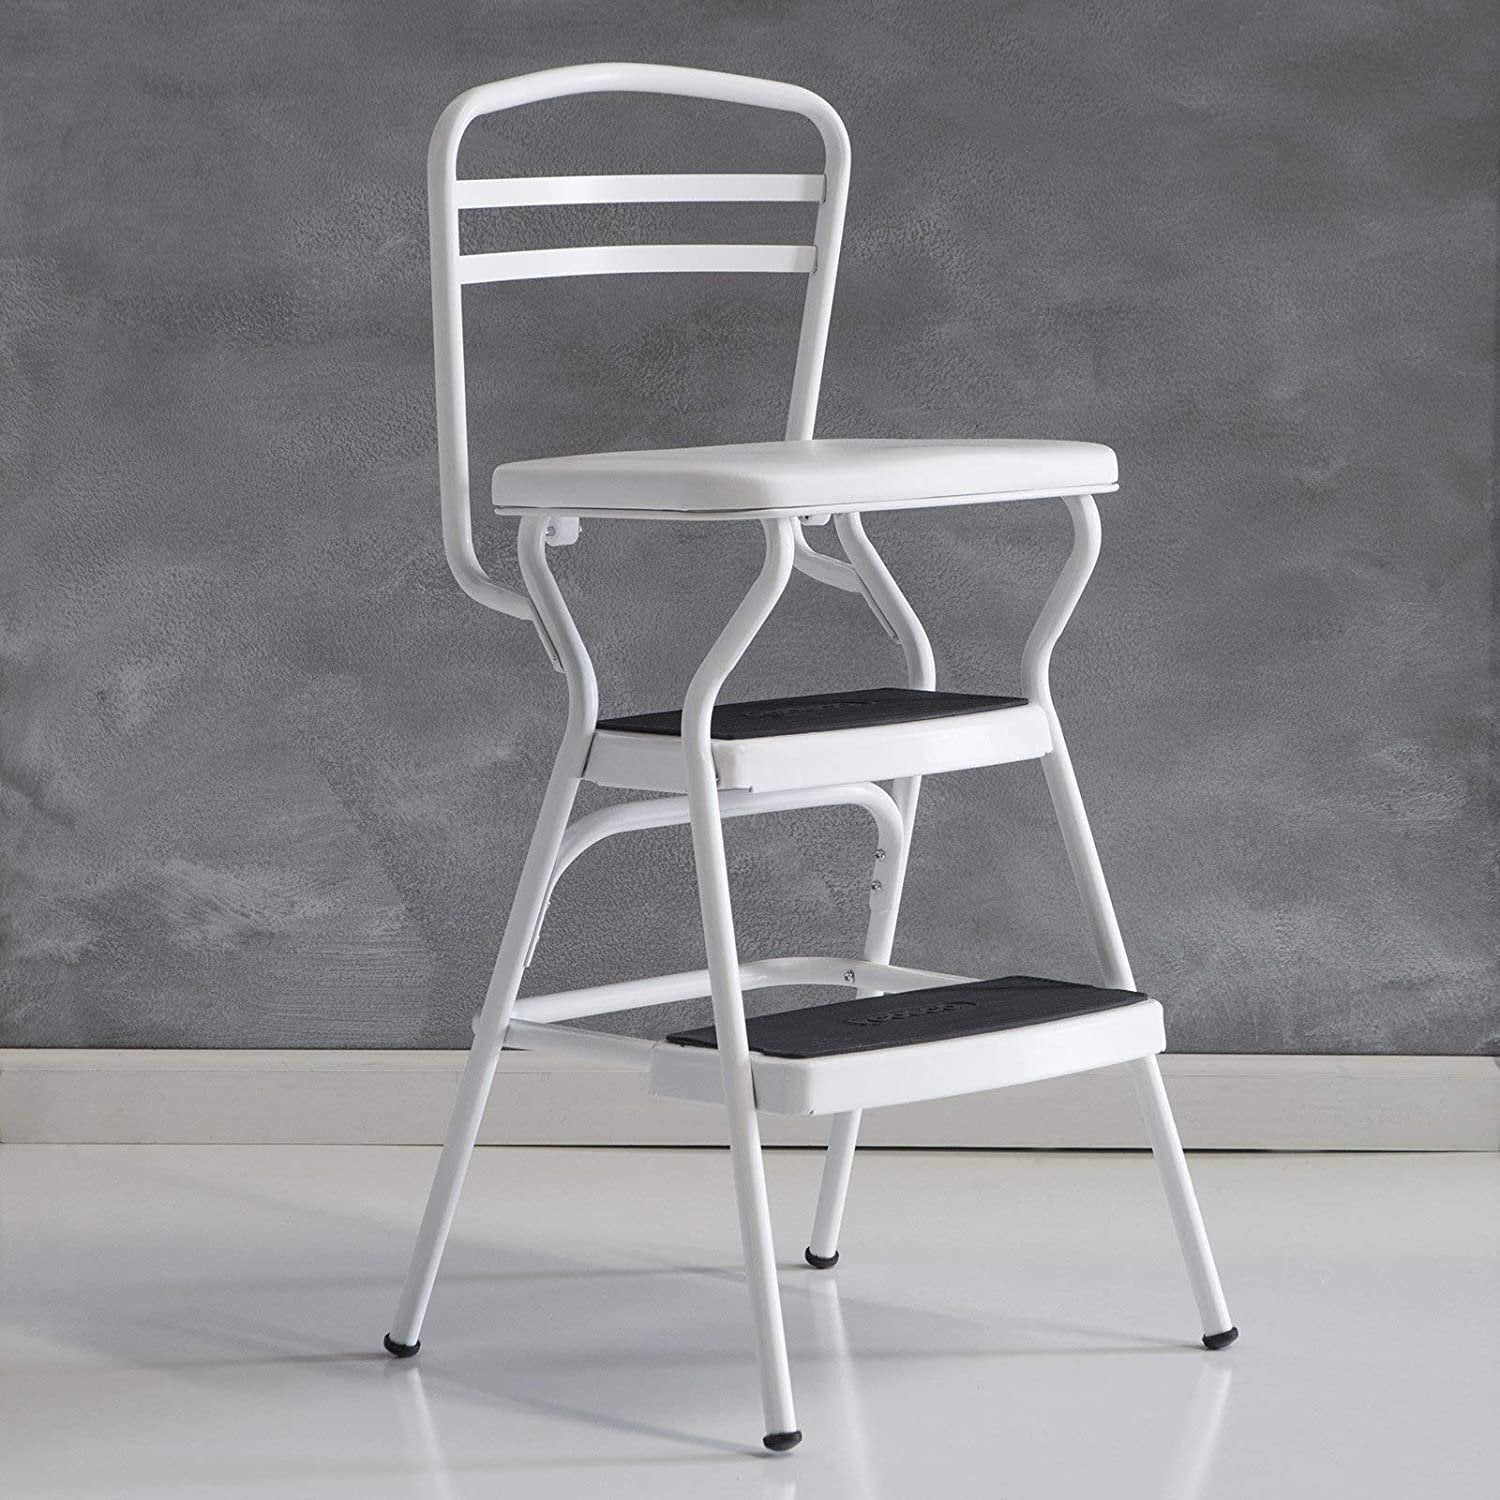 Cosco White Retro Counter Chair Step, Cosco Retro Chair And Step Stool With Lift Up Seat White